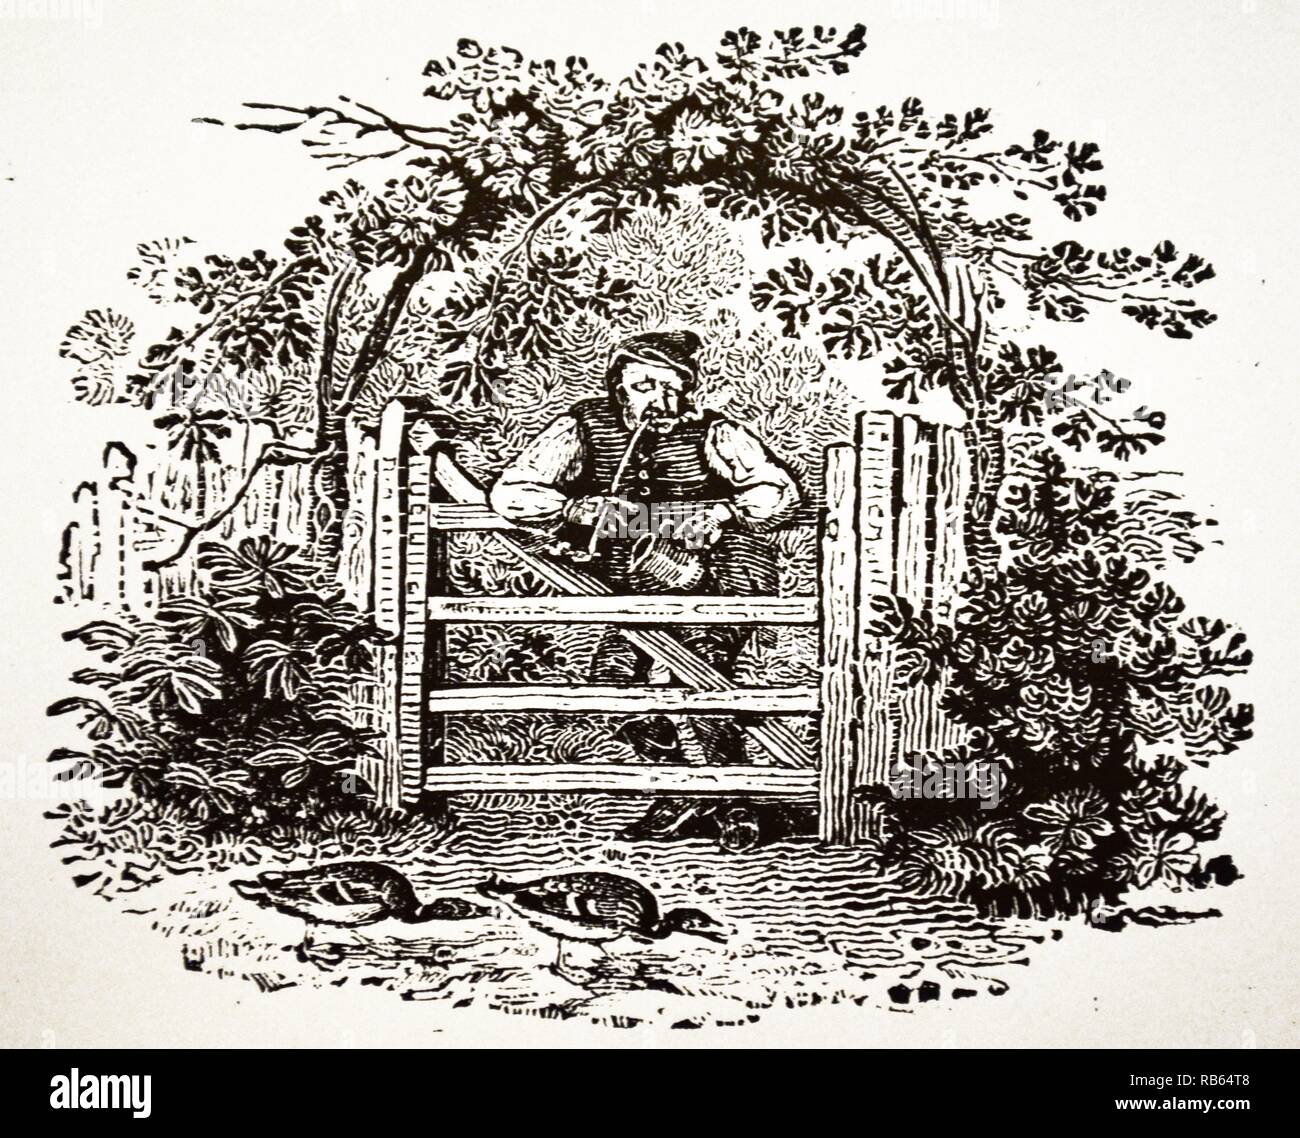 Countrtyman smoking a churchwarden, clay, pipe as he leans over the gate contemplating a future dinner of duck. Wood engraving from ''History of Brtitish Birds'', by Thomas Bewick, Newcastle, 1797-1804. Stock Photo